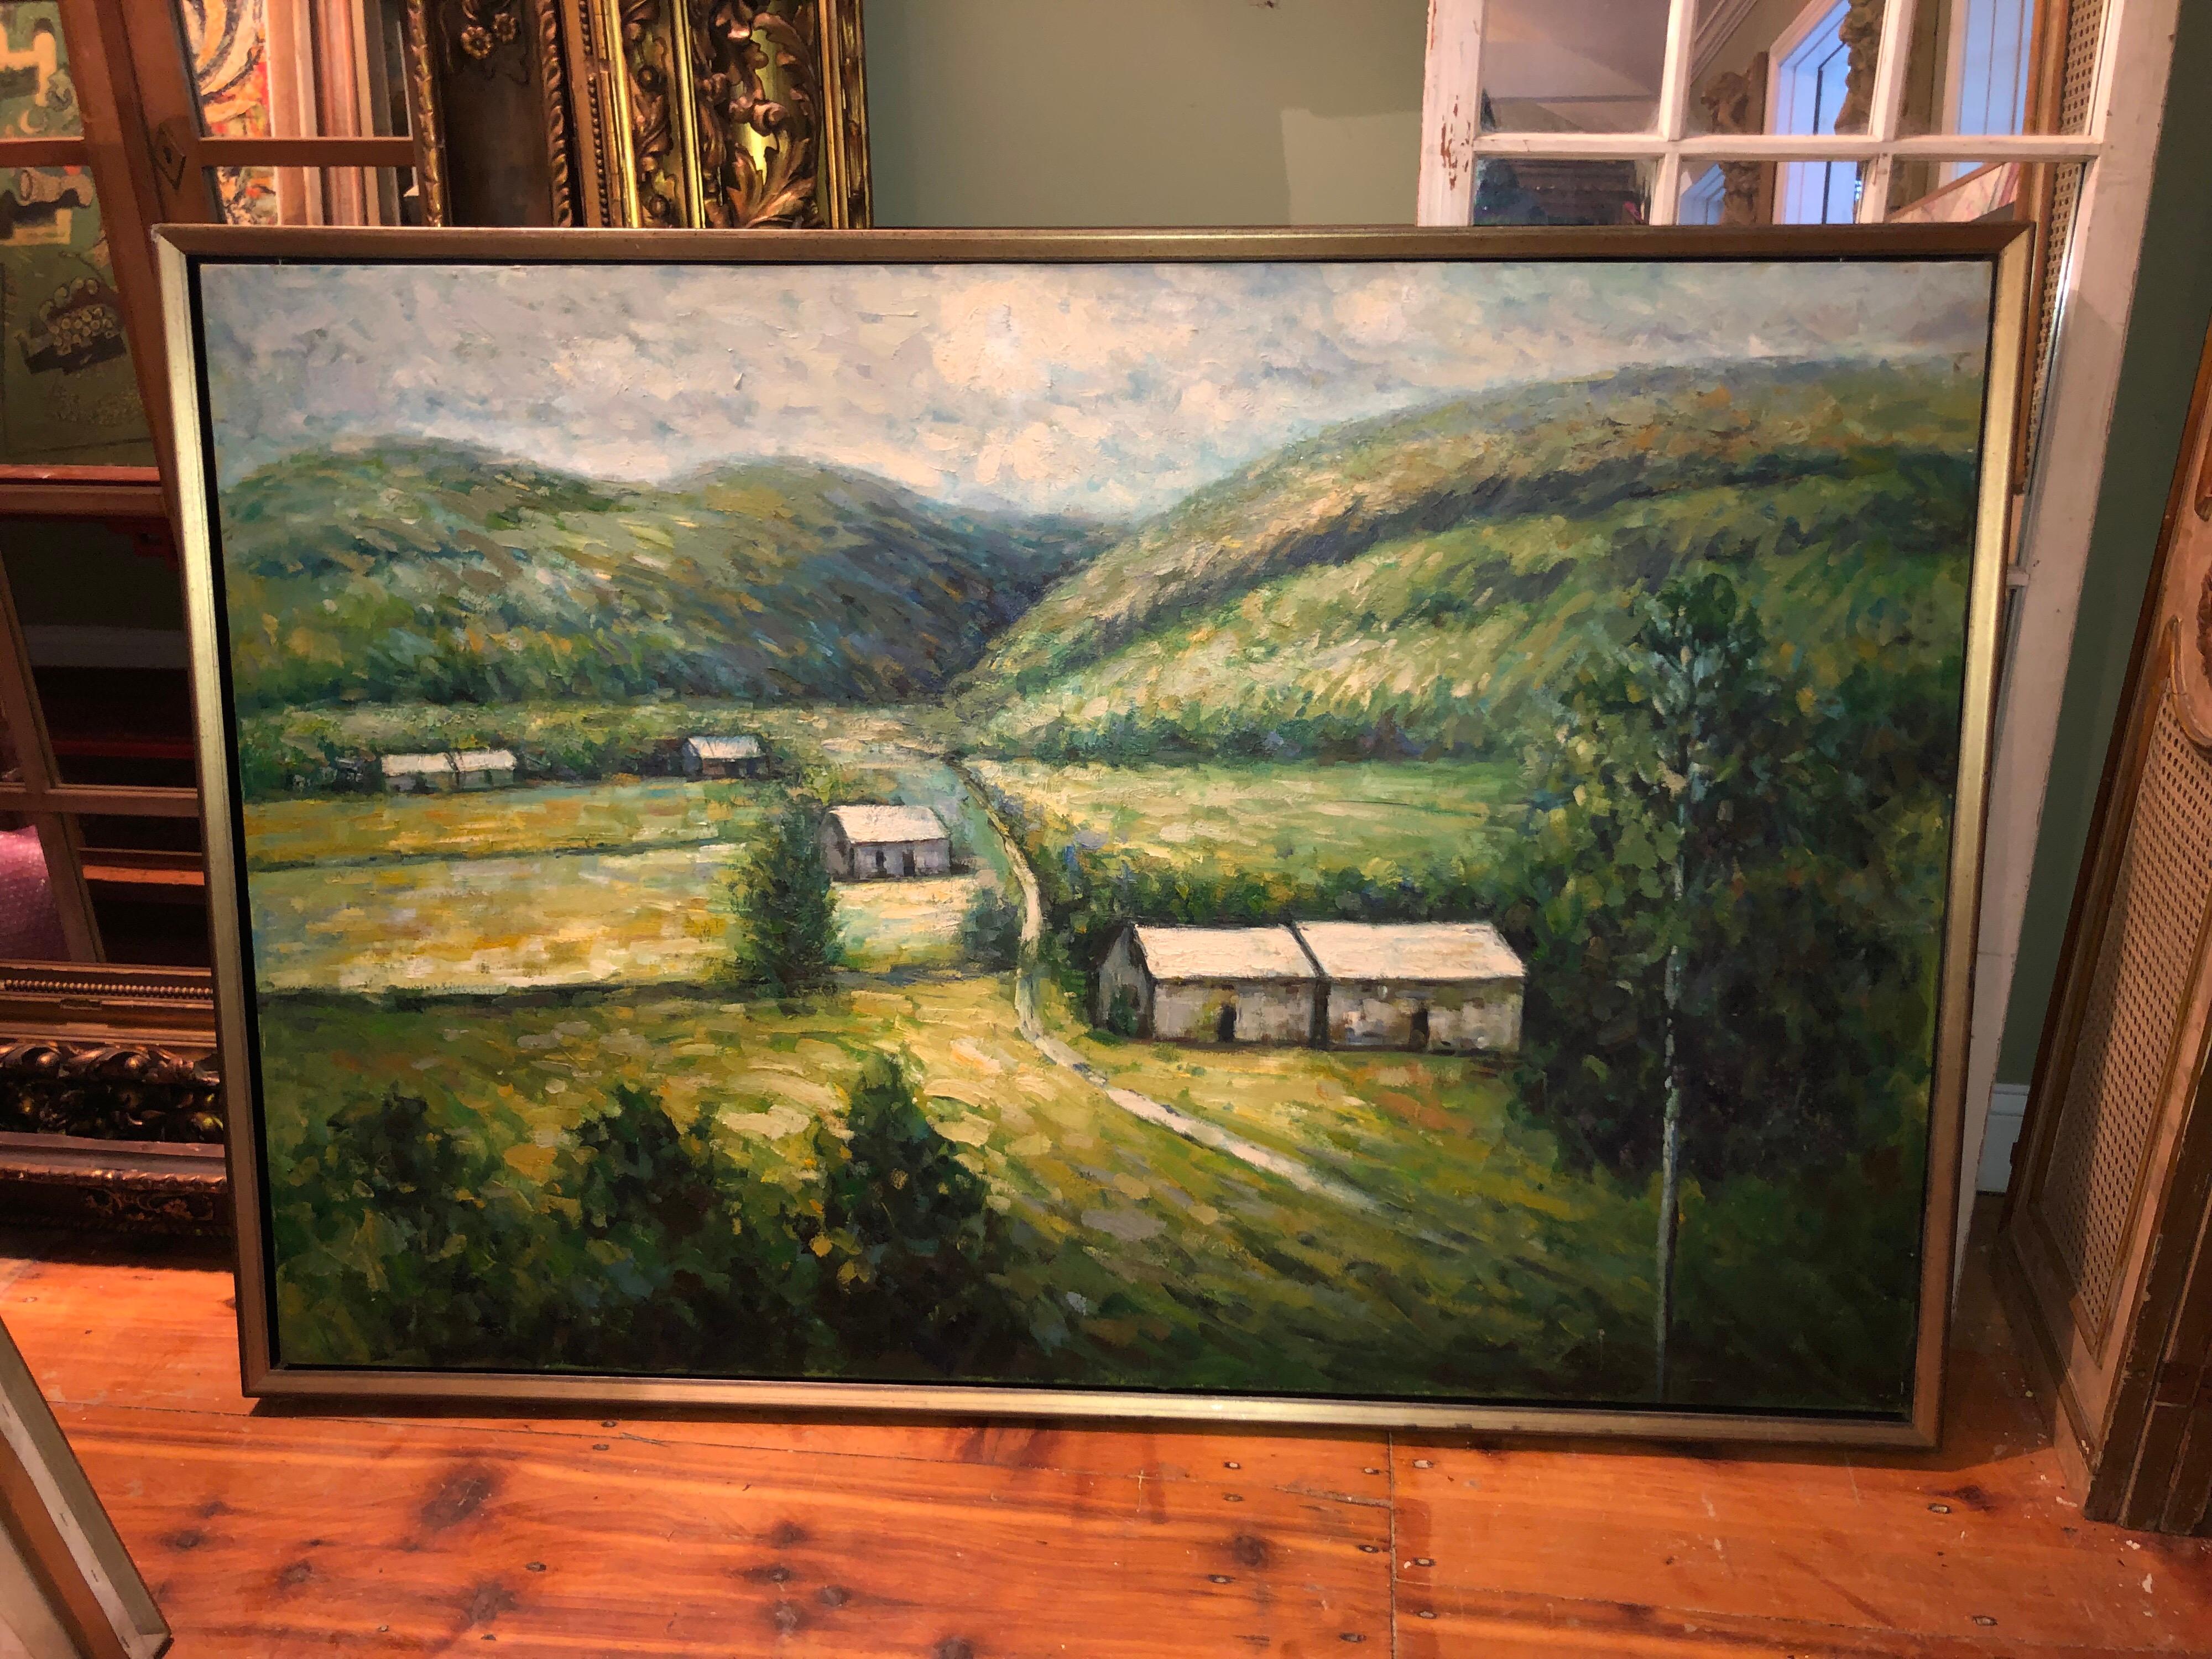 Huge 3.50' x 5' Impasto Plein Air landscape oil on canvas. Perfect for that large empty wall. Deep, rich landscape that pulls you in. Heavy impasto painted technique. Bucolic green mountains and a few small cottages make up the composition.